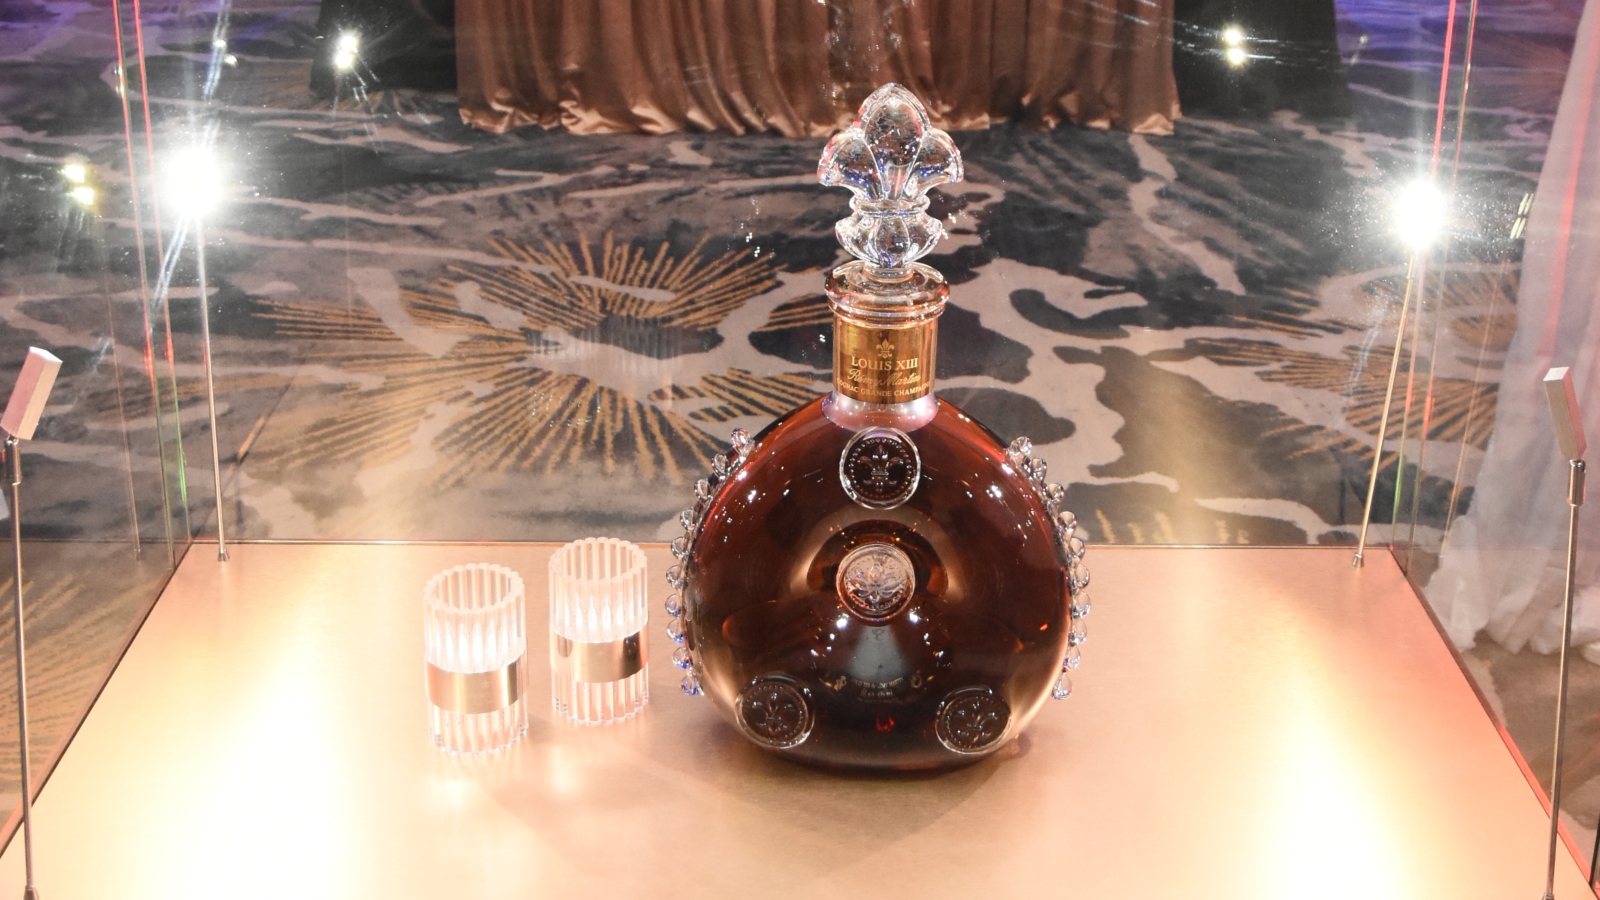 The World's First 6 Litre Crystal Decanter Of Cognac Is Here In Kuala  Lumpur